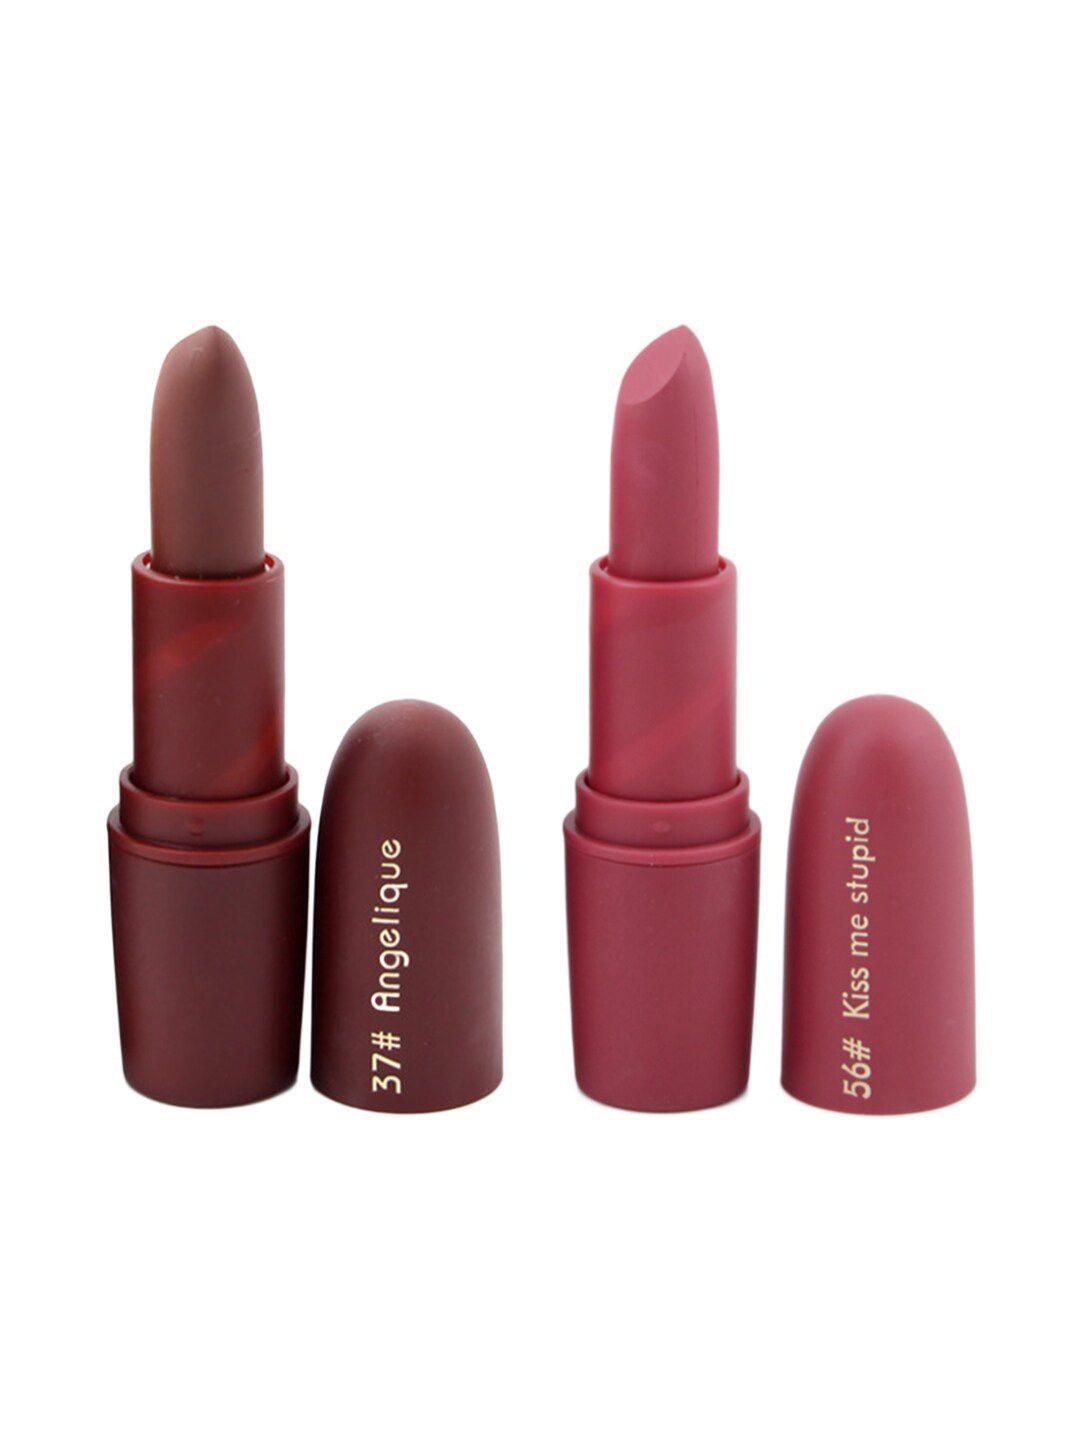 MISS ROSE Professional Make-Up Set of 2 Matte Lipsticks - Angelique 37 & Kiss Me Stupid 56 Price in India